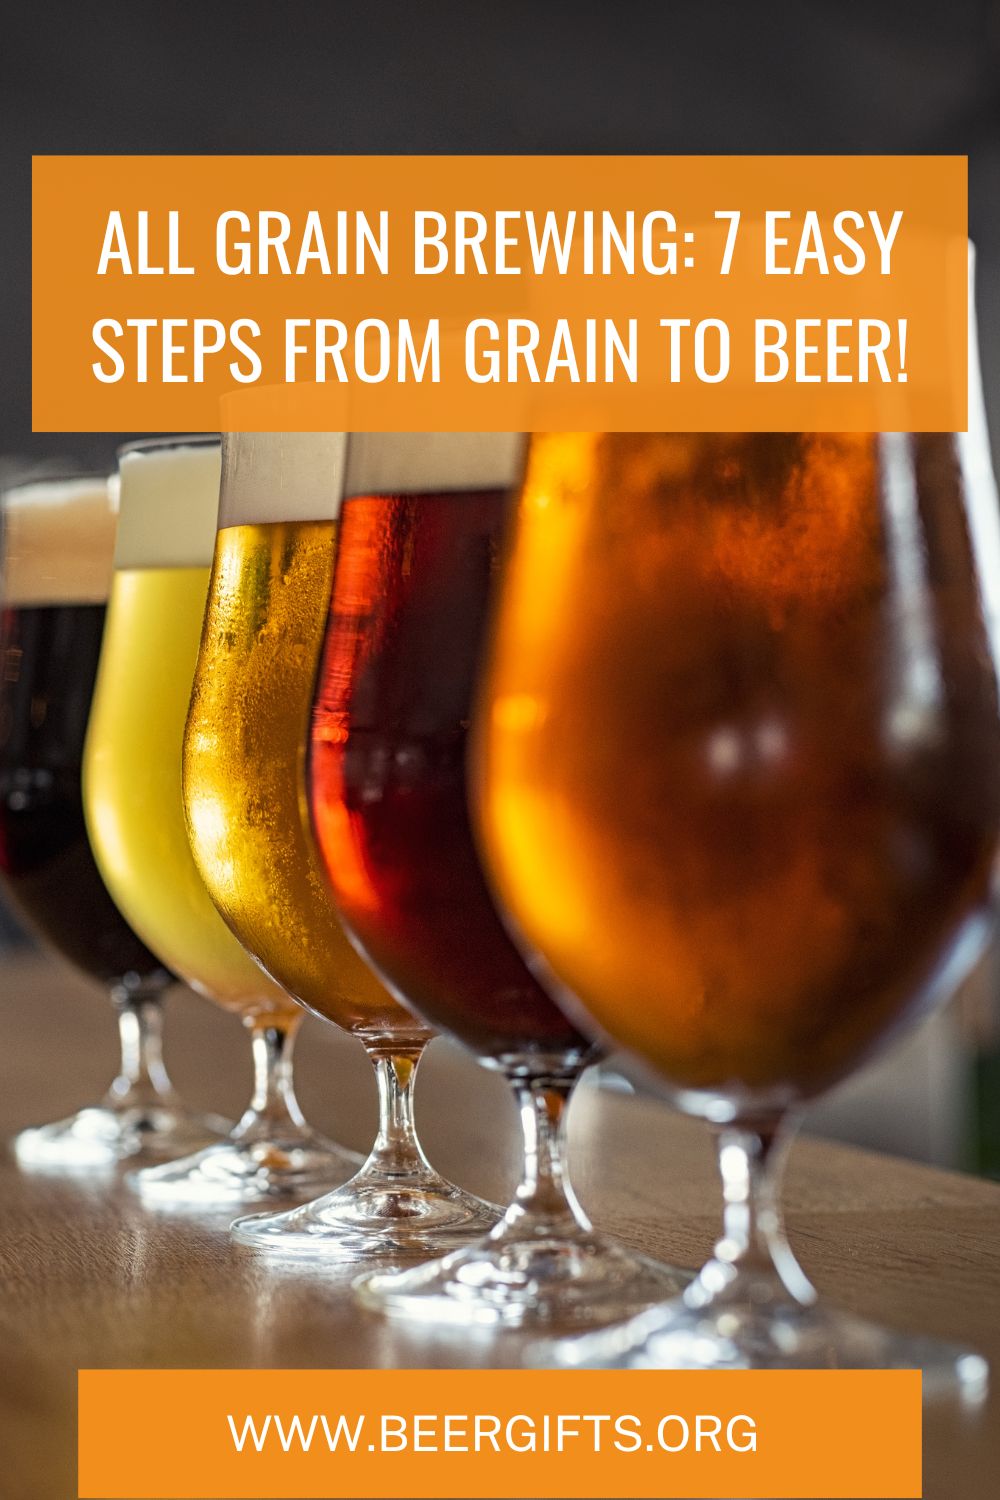 All Grain Brewing 7 Easy Steps from Grain to Beer!1